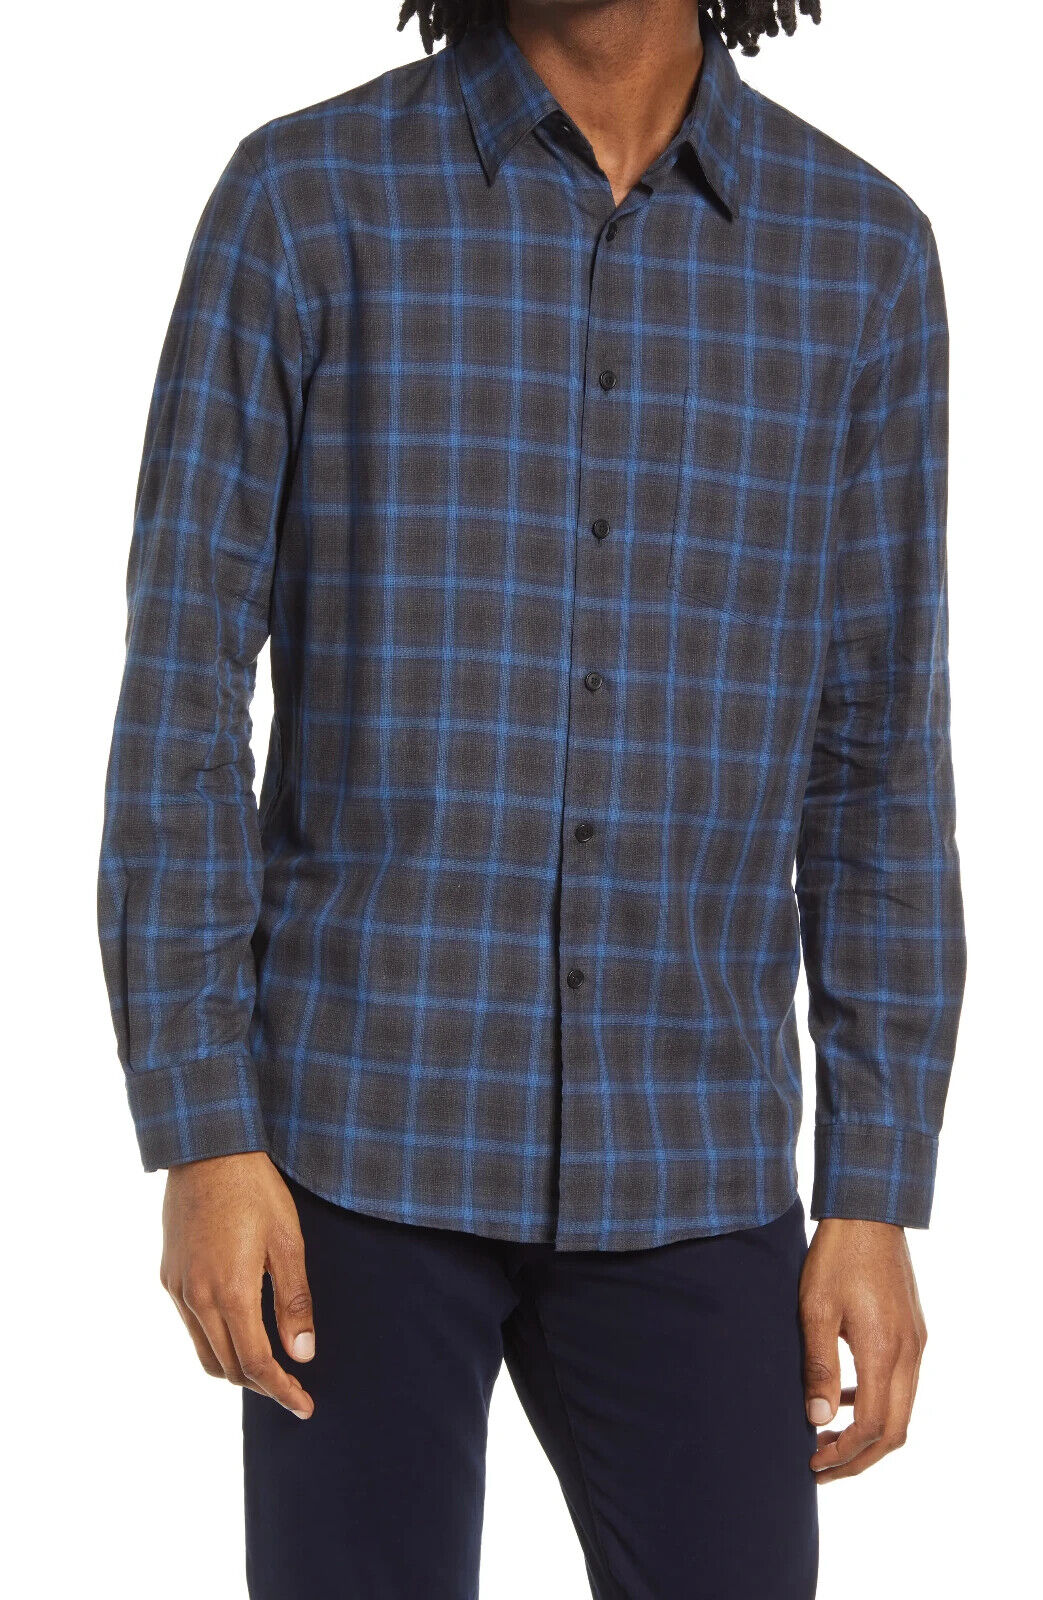 THEORY Noll Flannel Button-Down Shirt MSRP $225 Size S # 4D 462 NEW